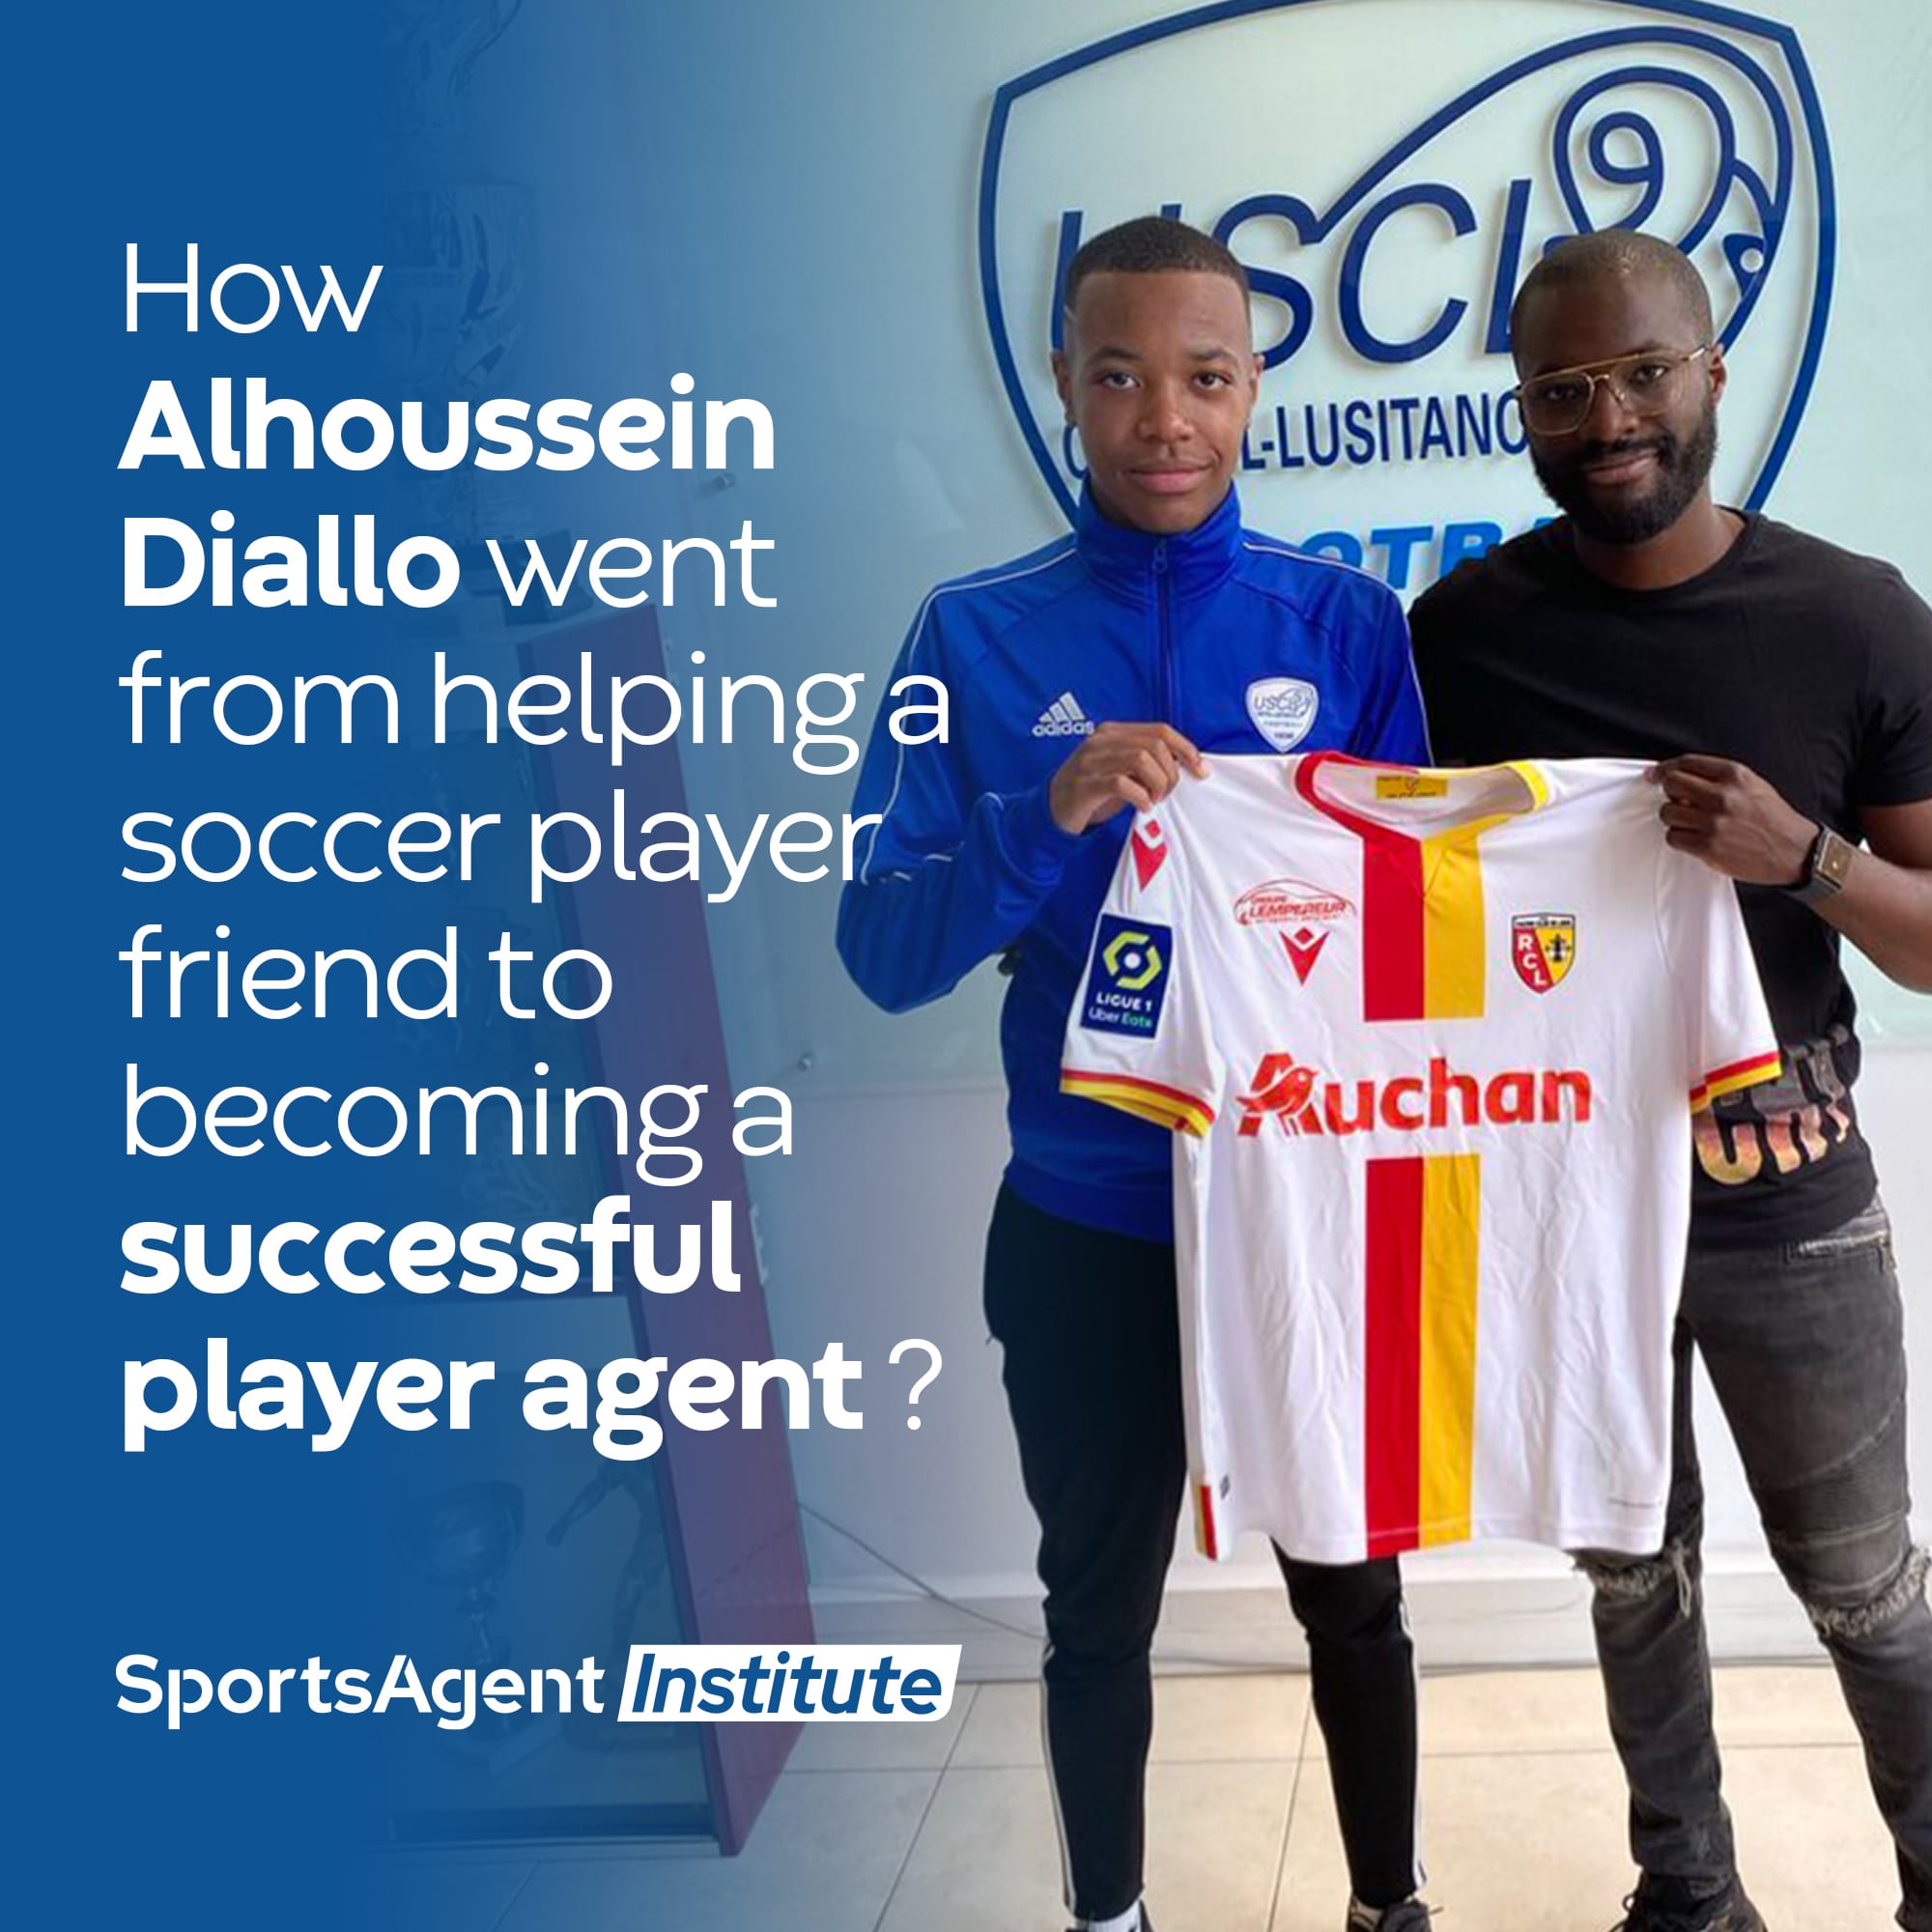 alhoussein-diallo-became-player-agenthelping-soccer-player-friend